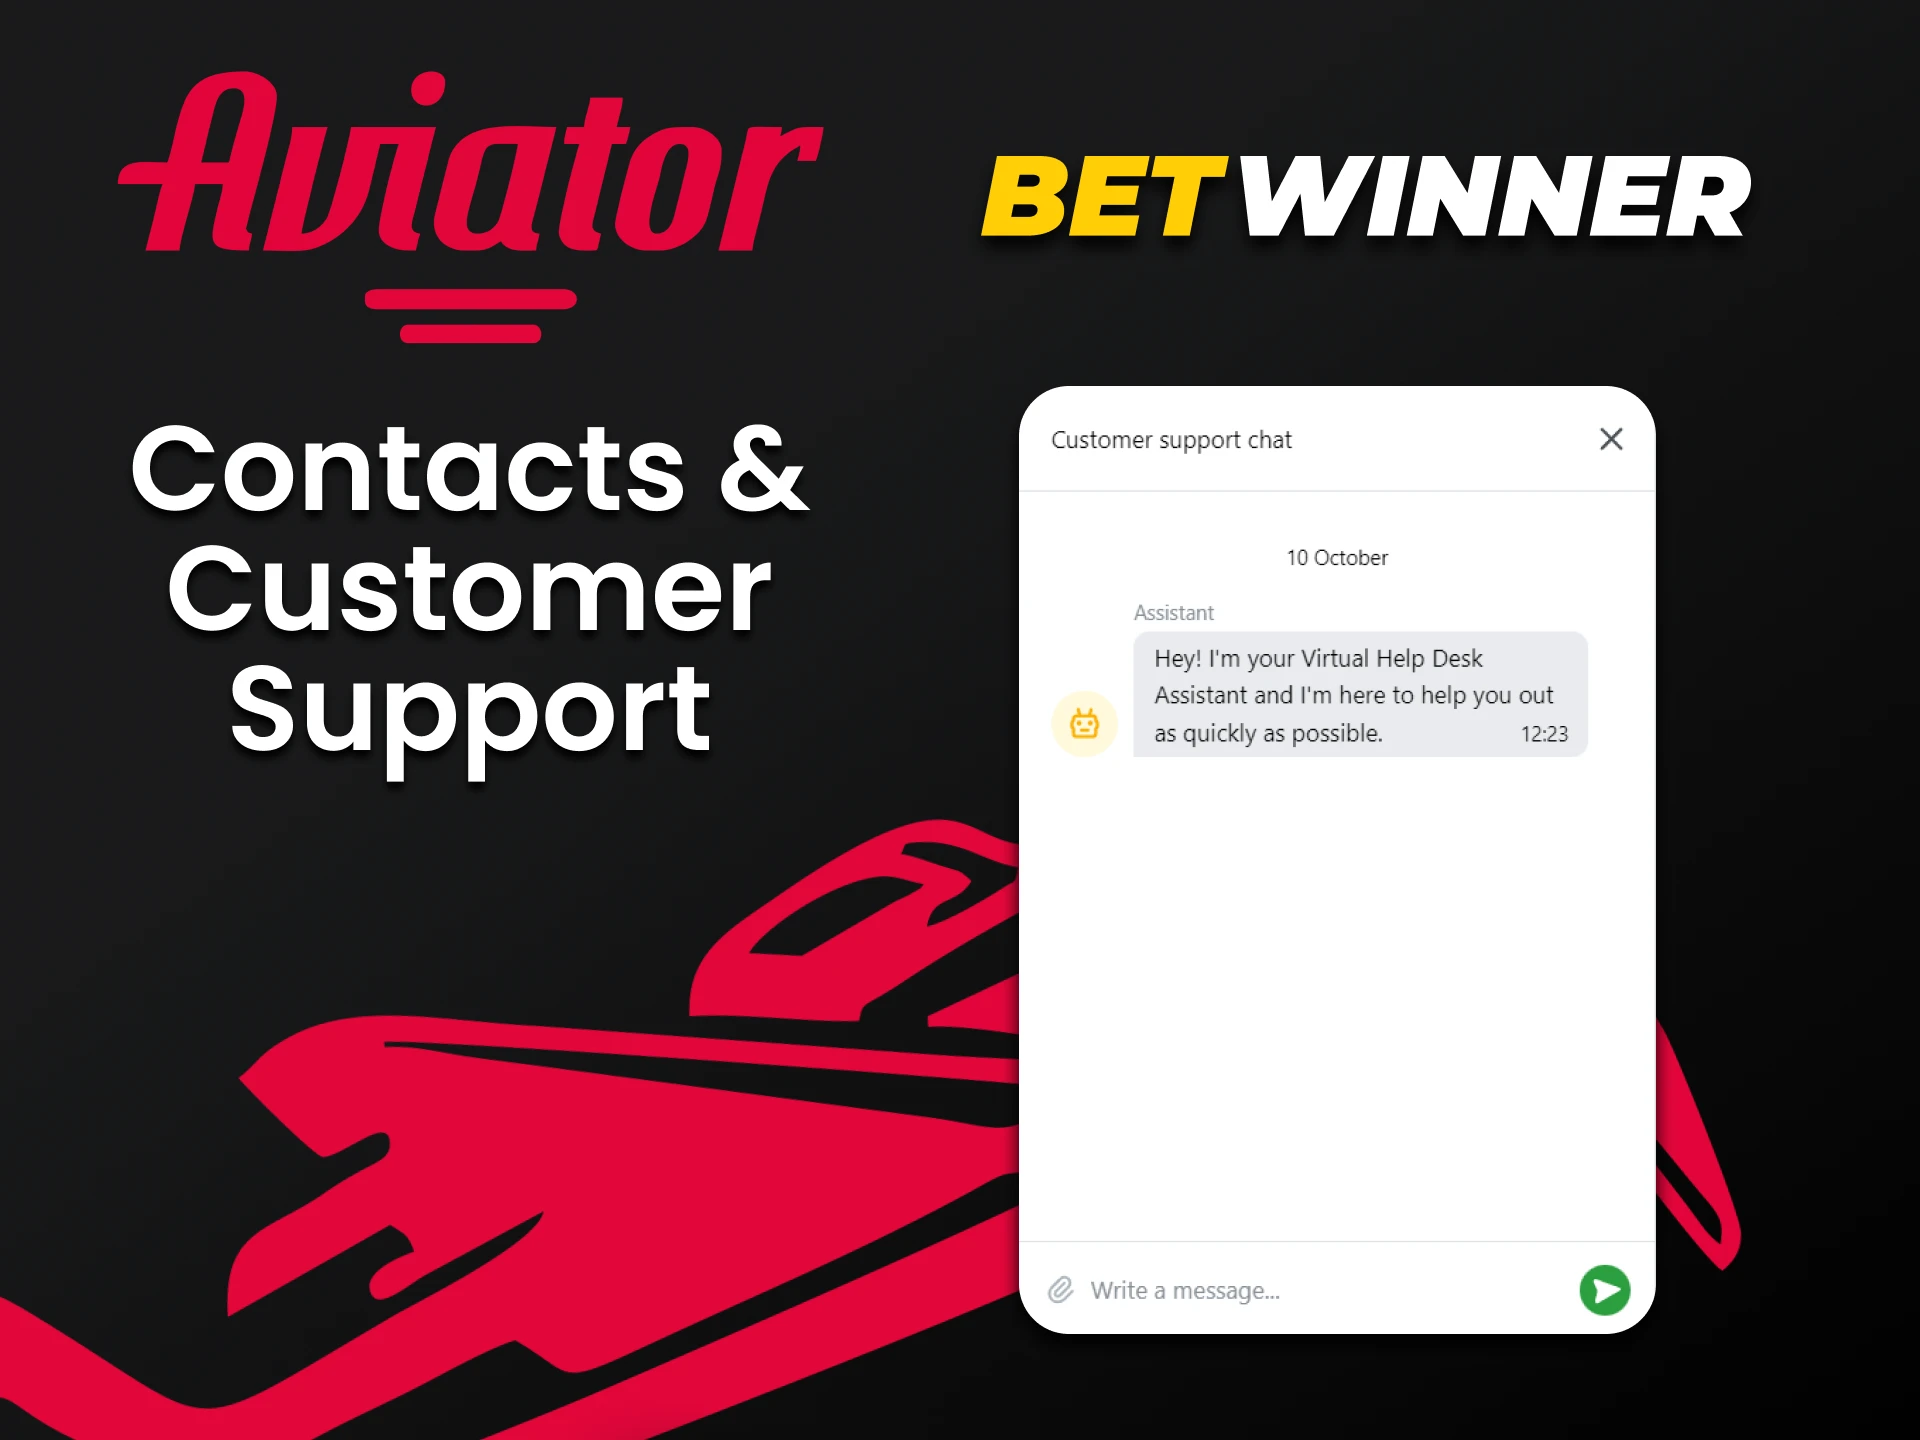 You can always ask questions to the Betwinner team regarding the Aviator game.